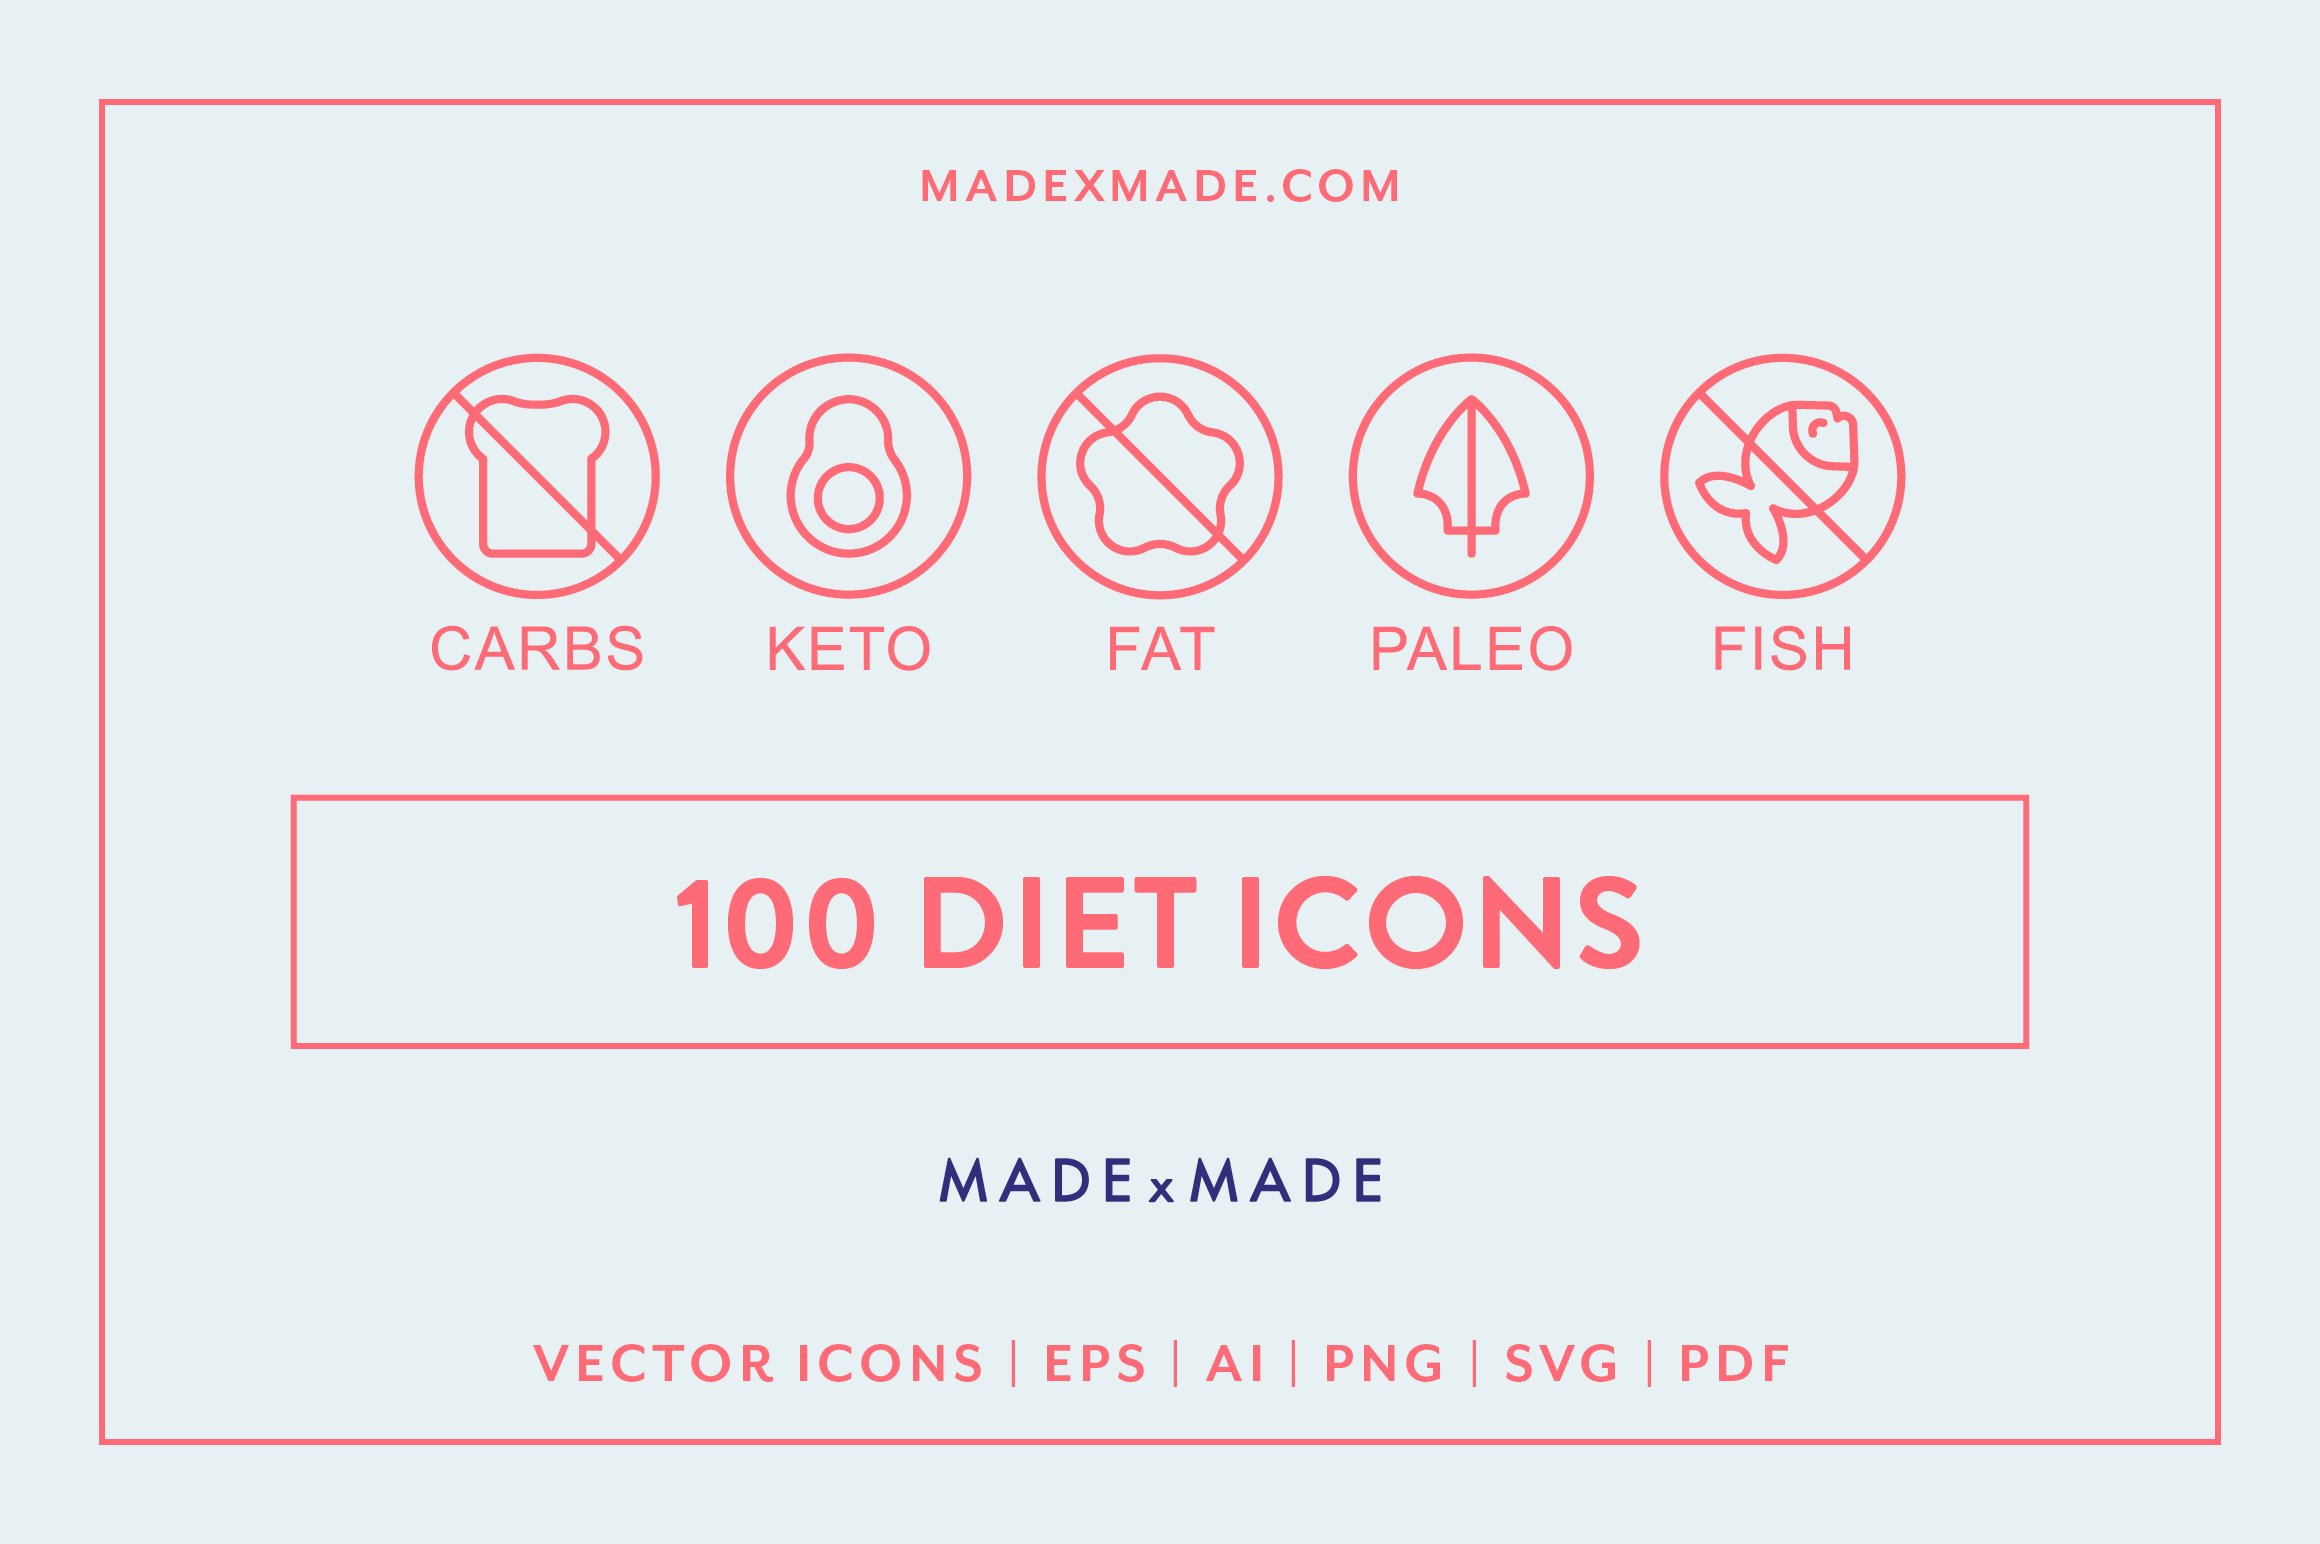 Diet Line Icons cover image.